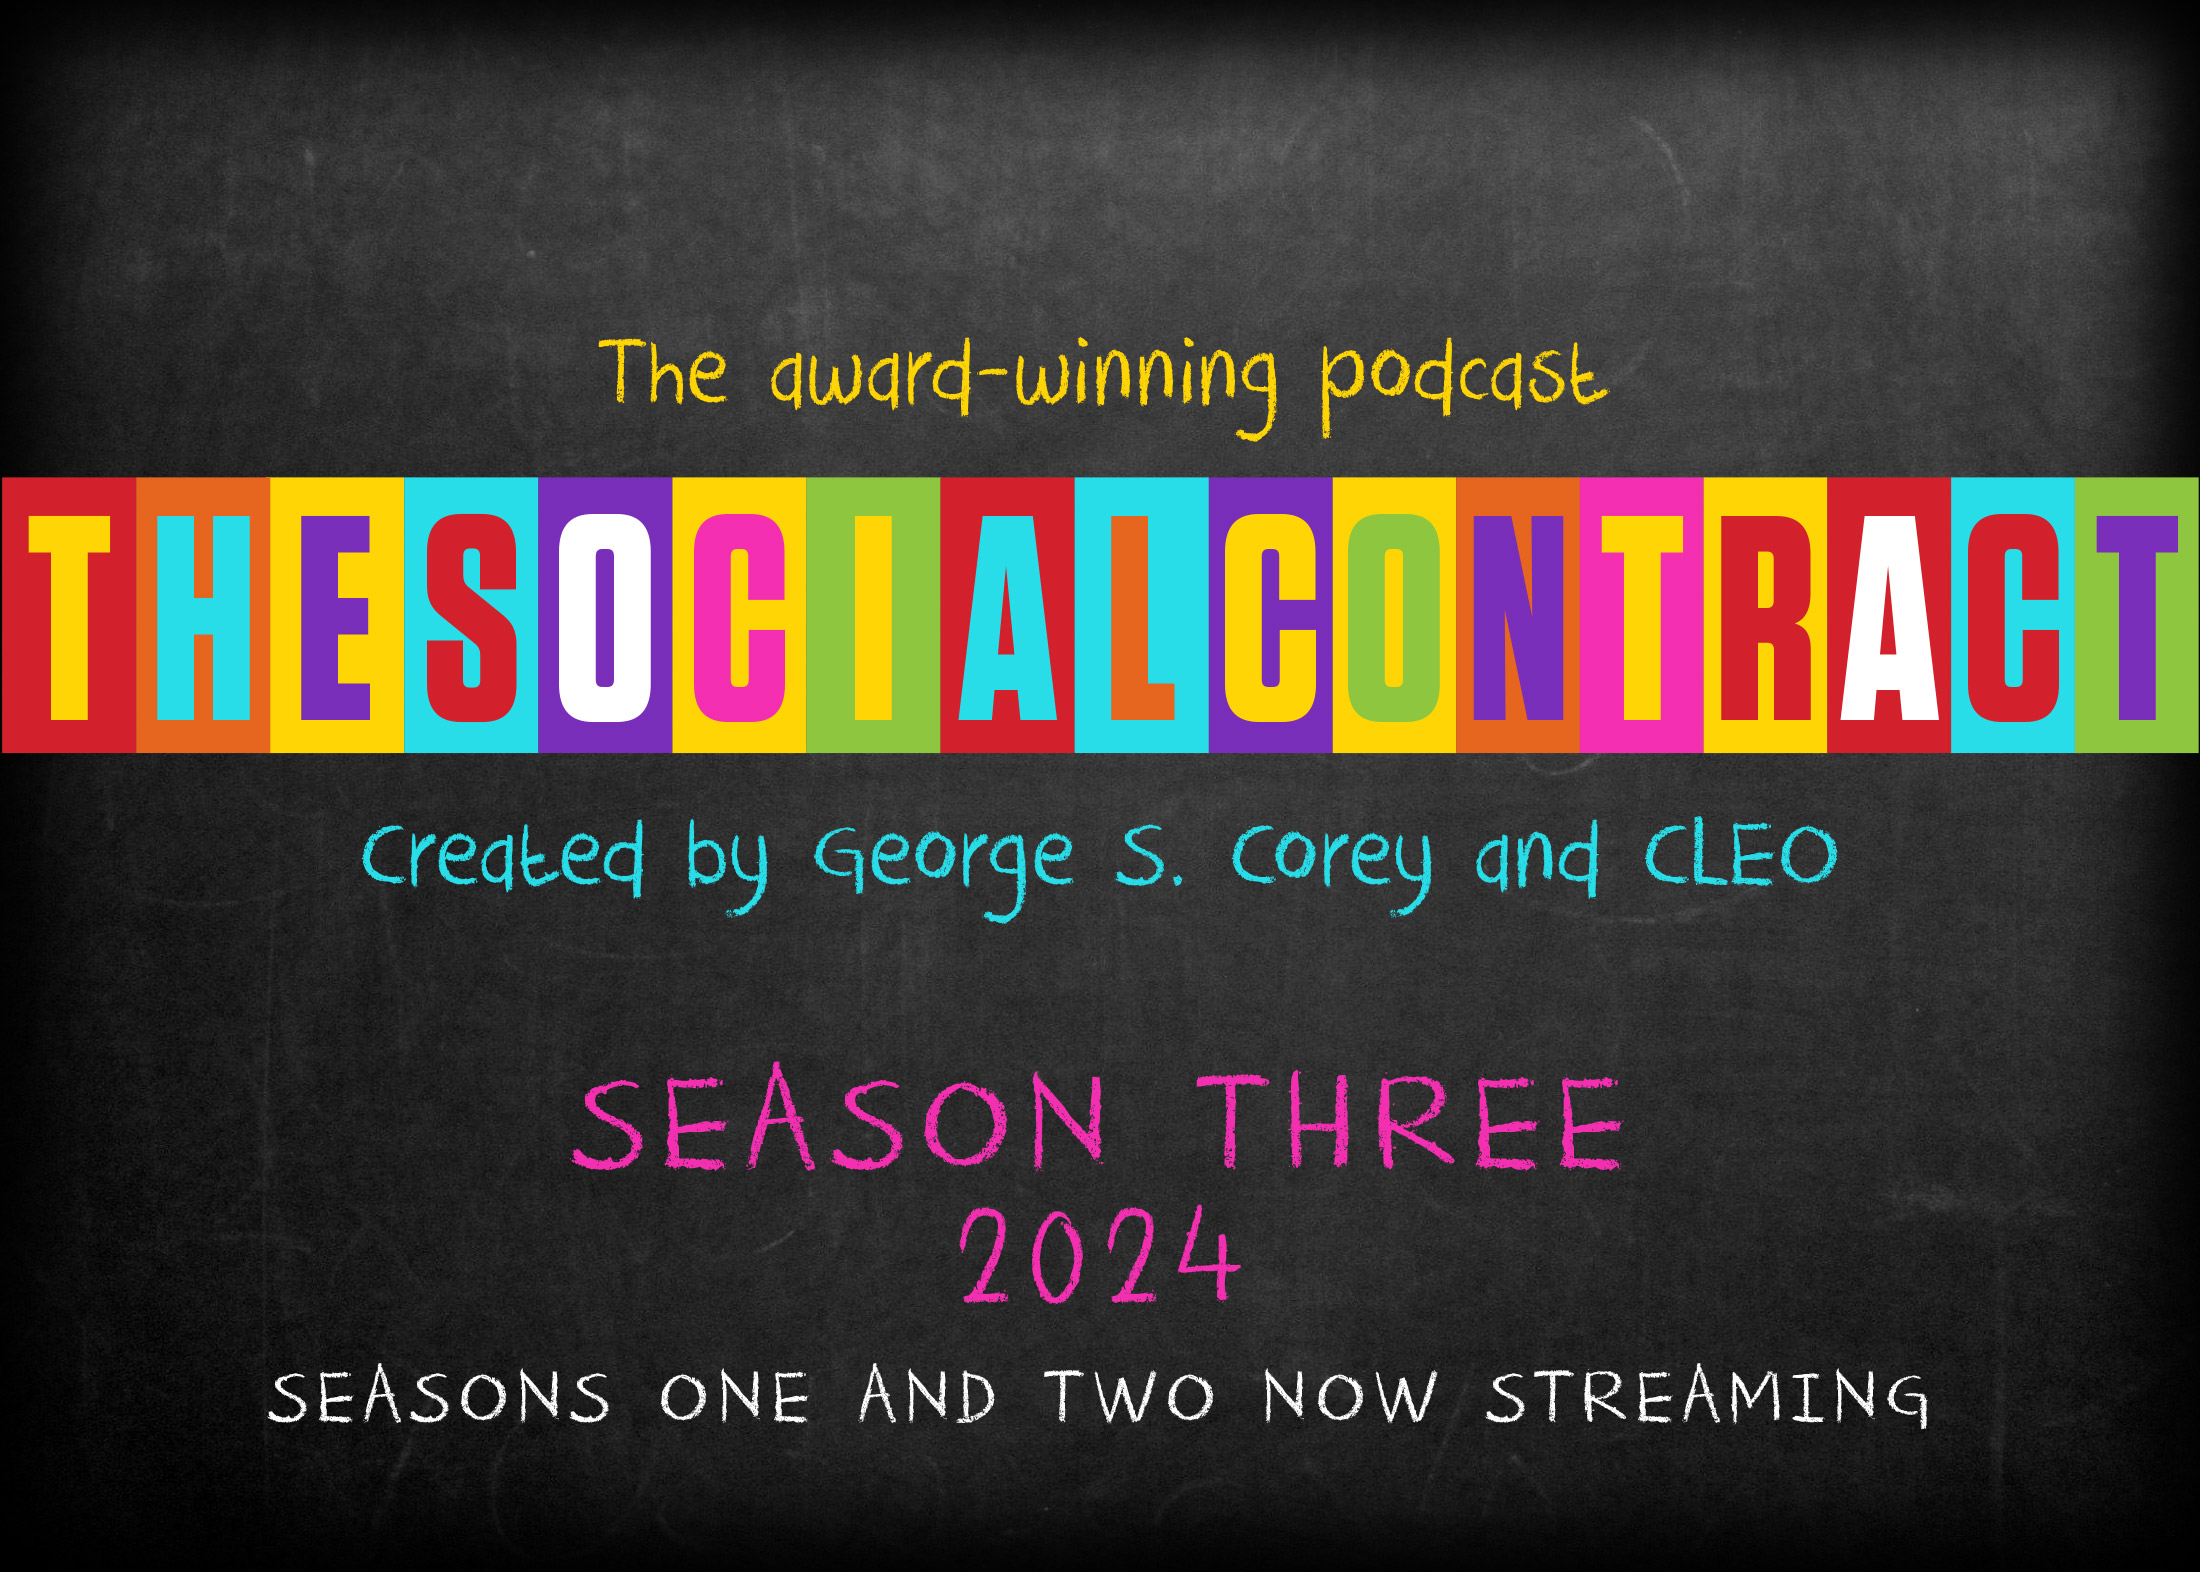 The Social Contract podcast